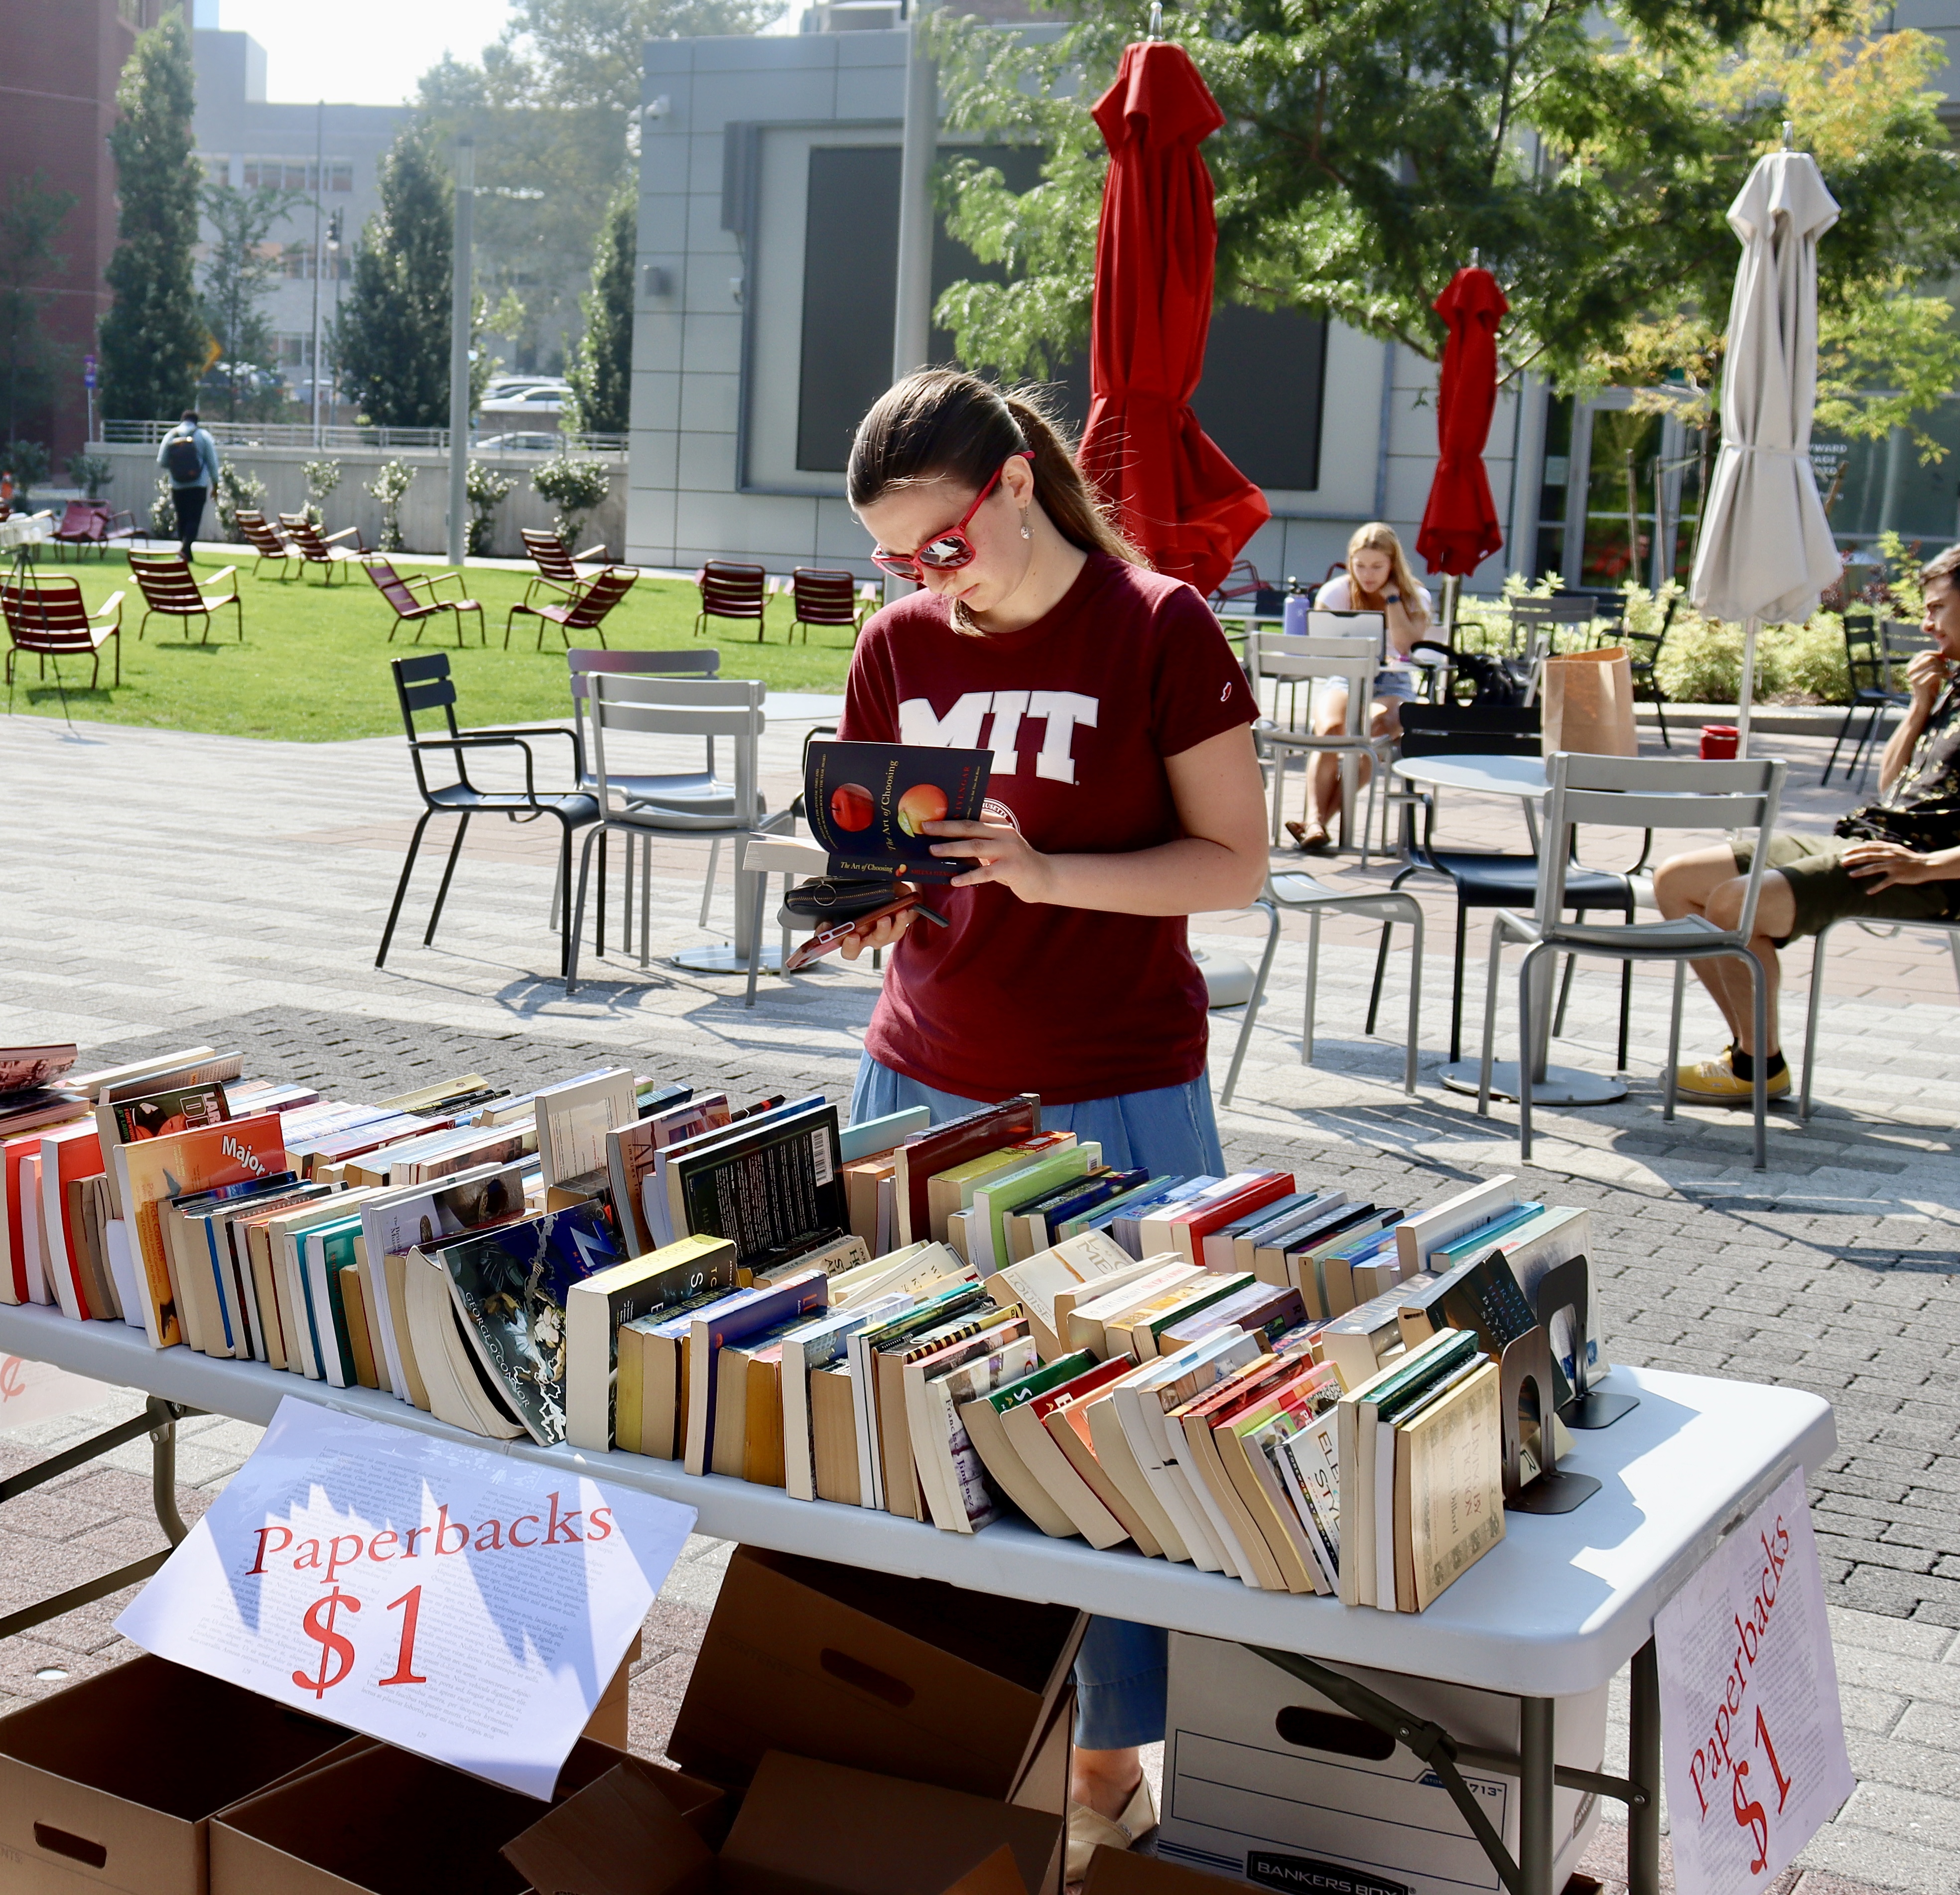 Caption:An MIT community member peruses the books, all of which were donated by MIT community.